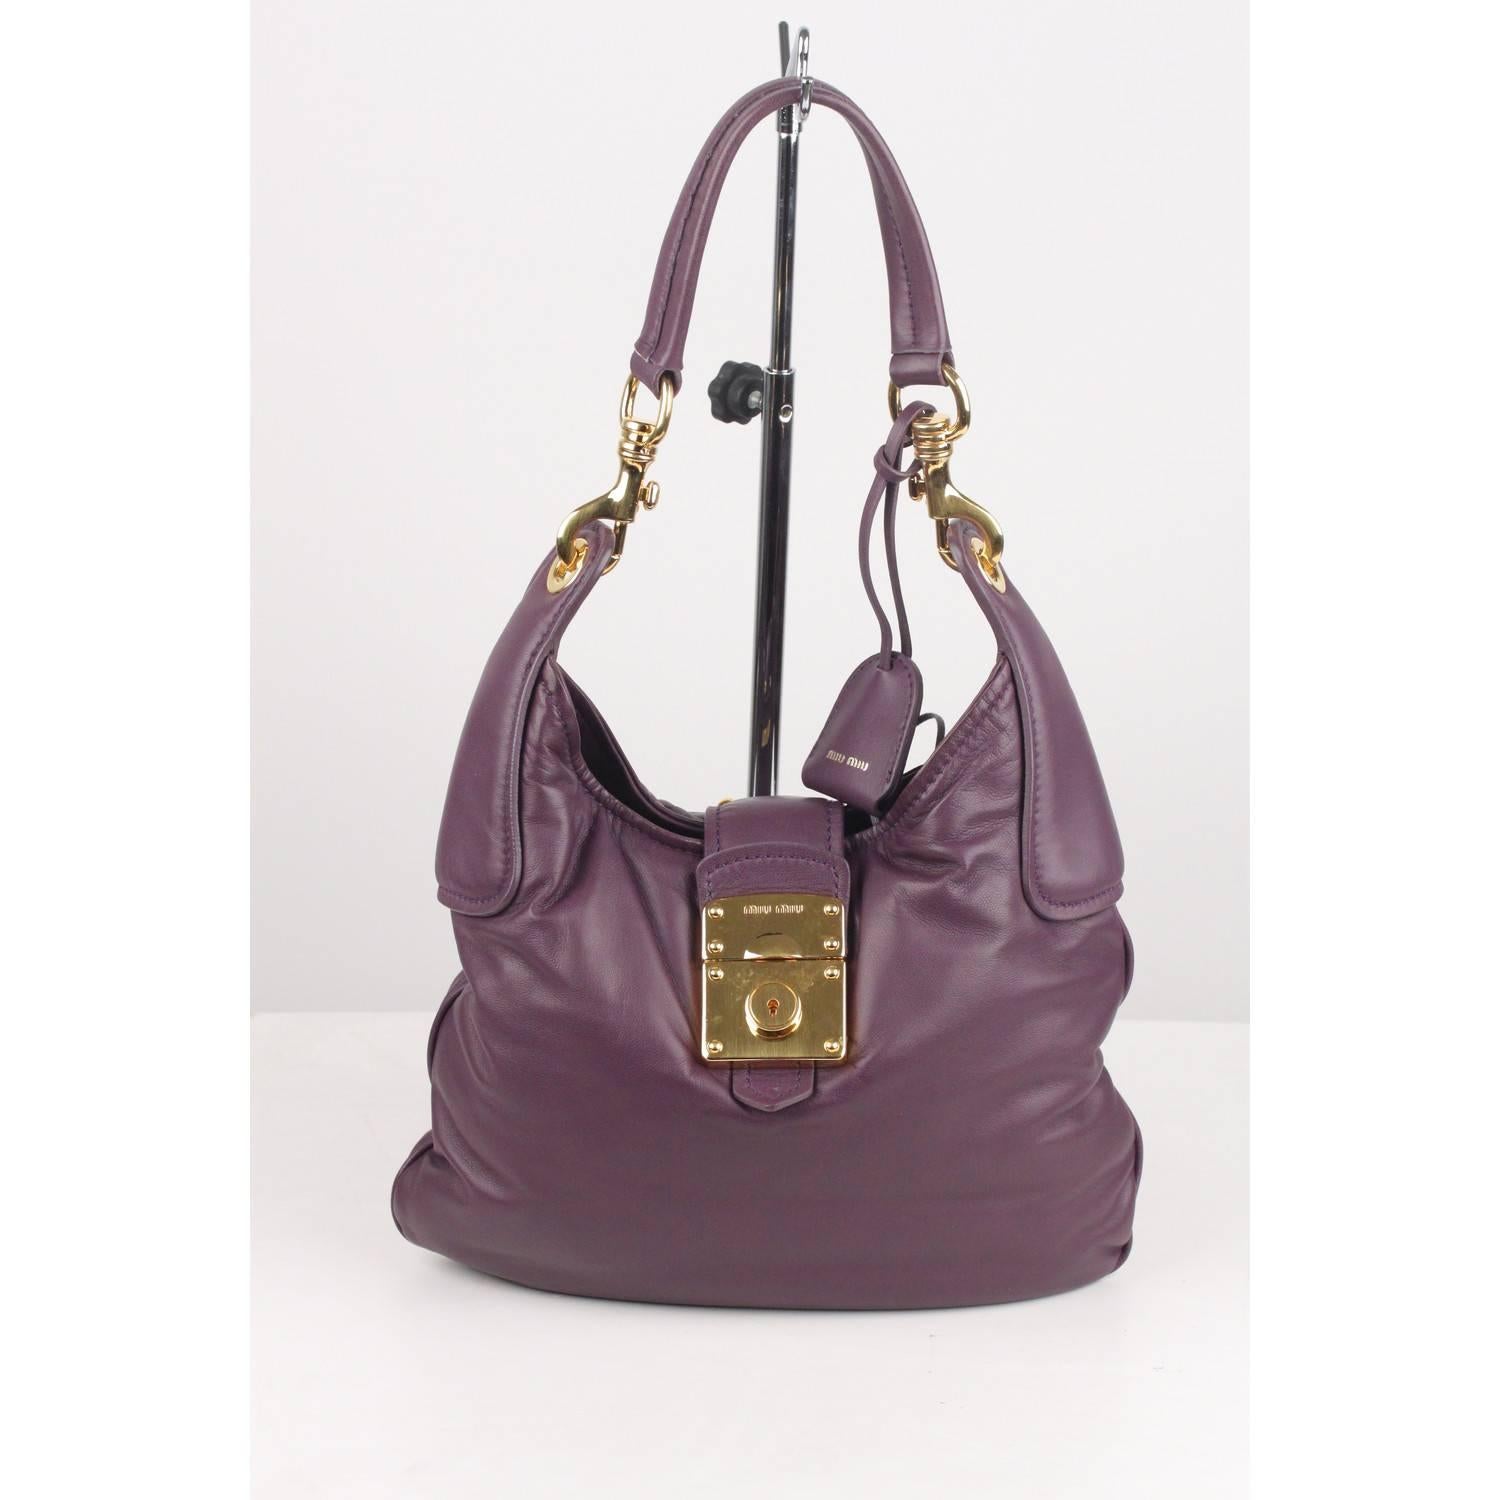 - Purple leather Miu Miu Hobo
- Fold over strap with slide closure
- Gold metal hardware
- Purple satin lining
- 'MIU MIU' logo engraved on the front
- 'MIU MIU - Made in Italy' tag inside
- Small tag with number inside the internal pocket